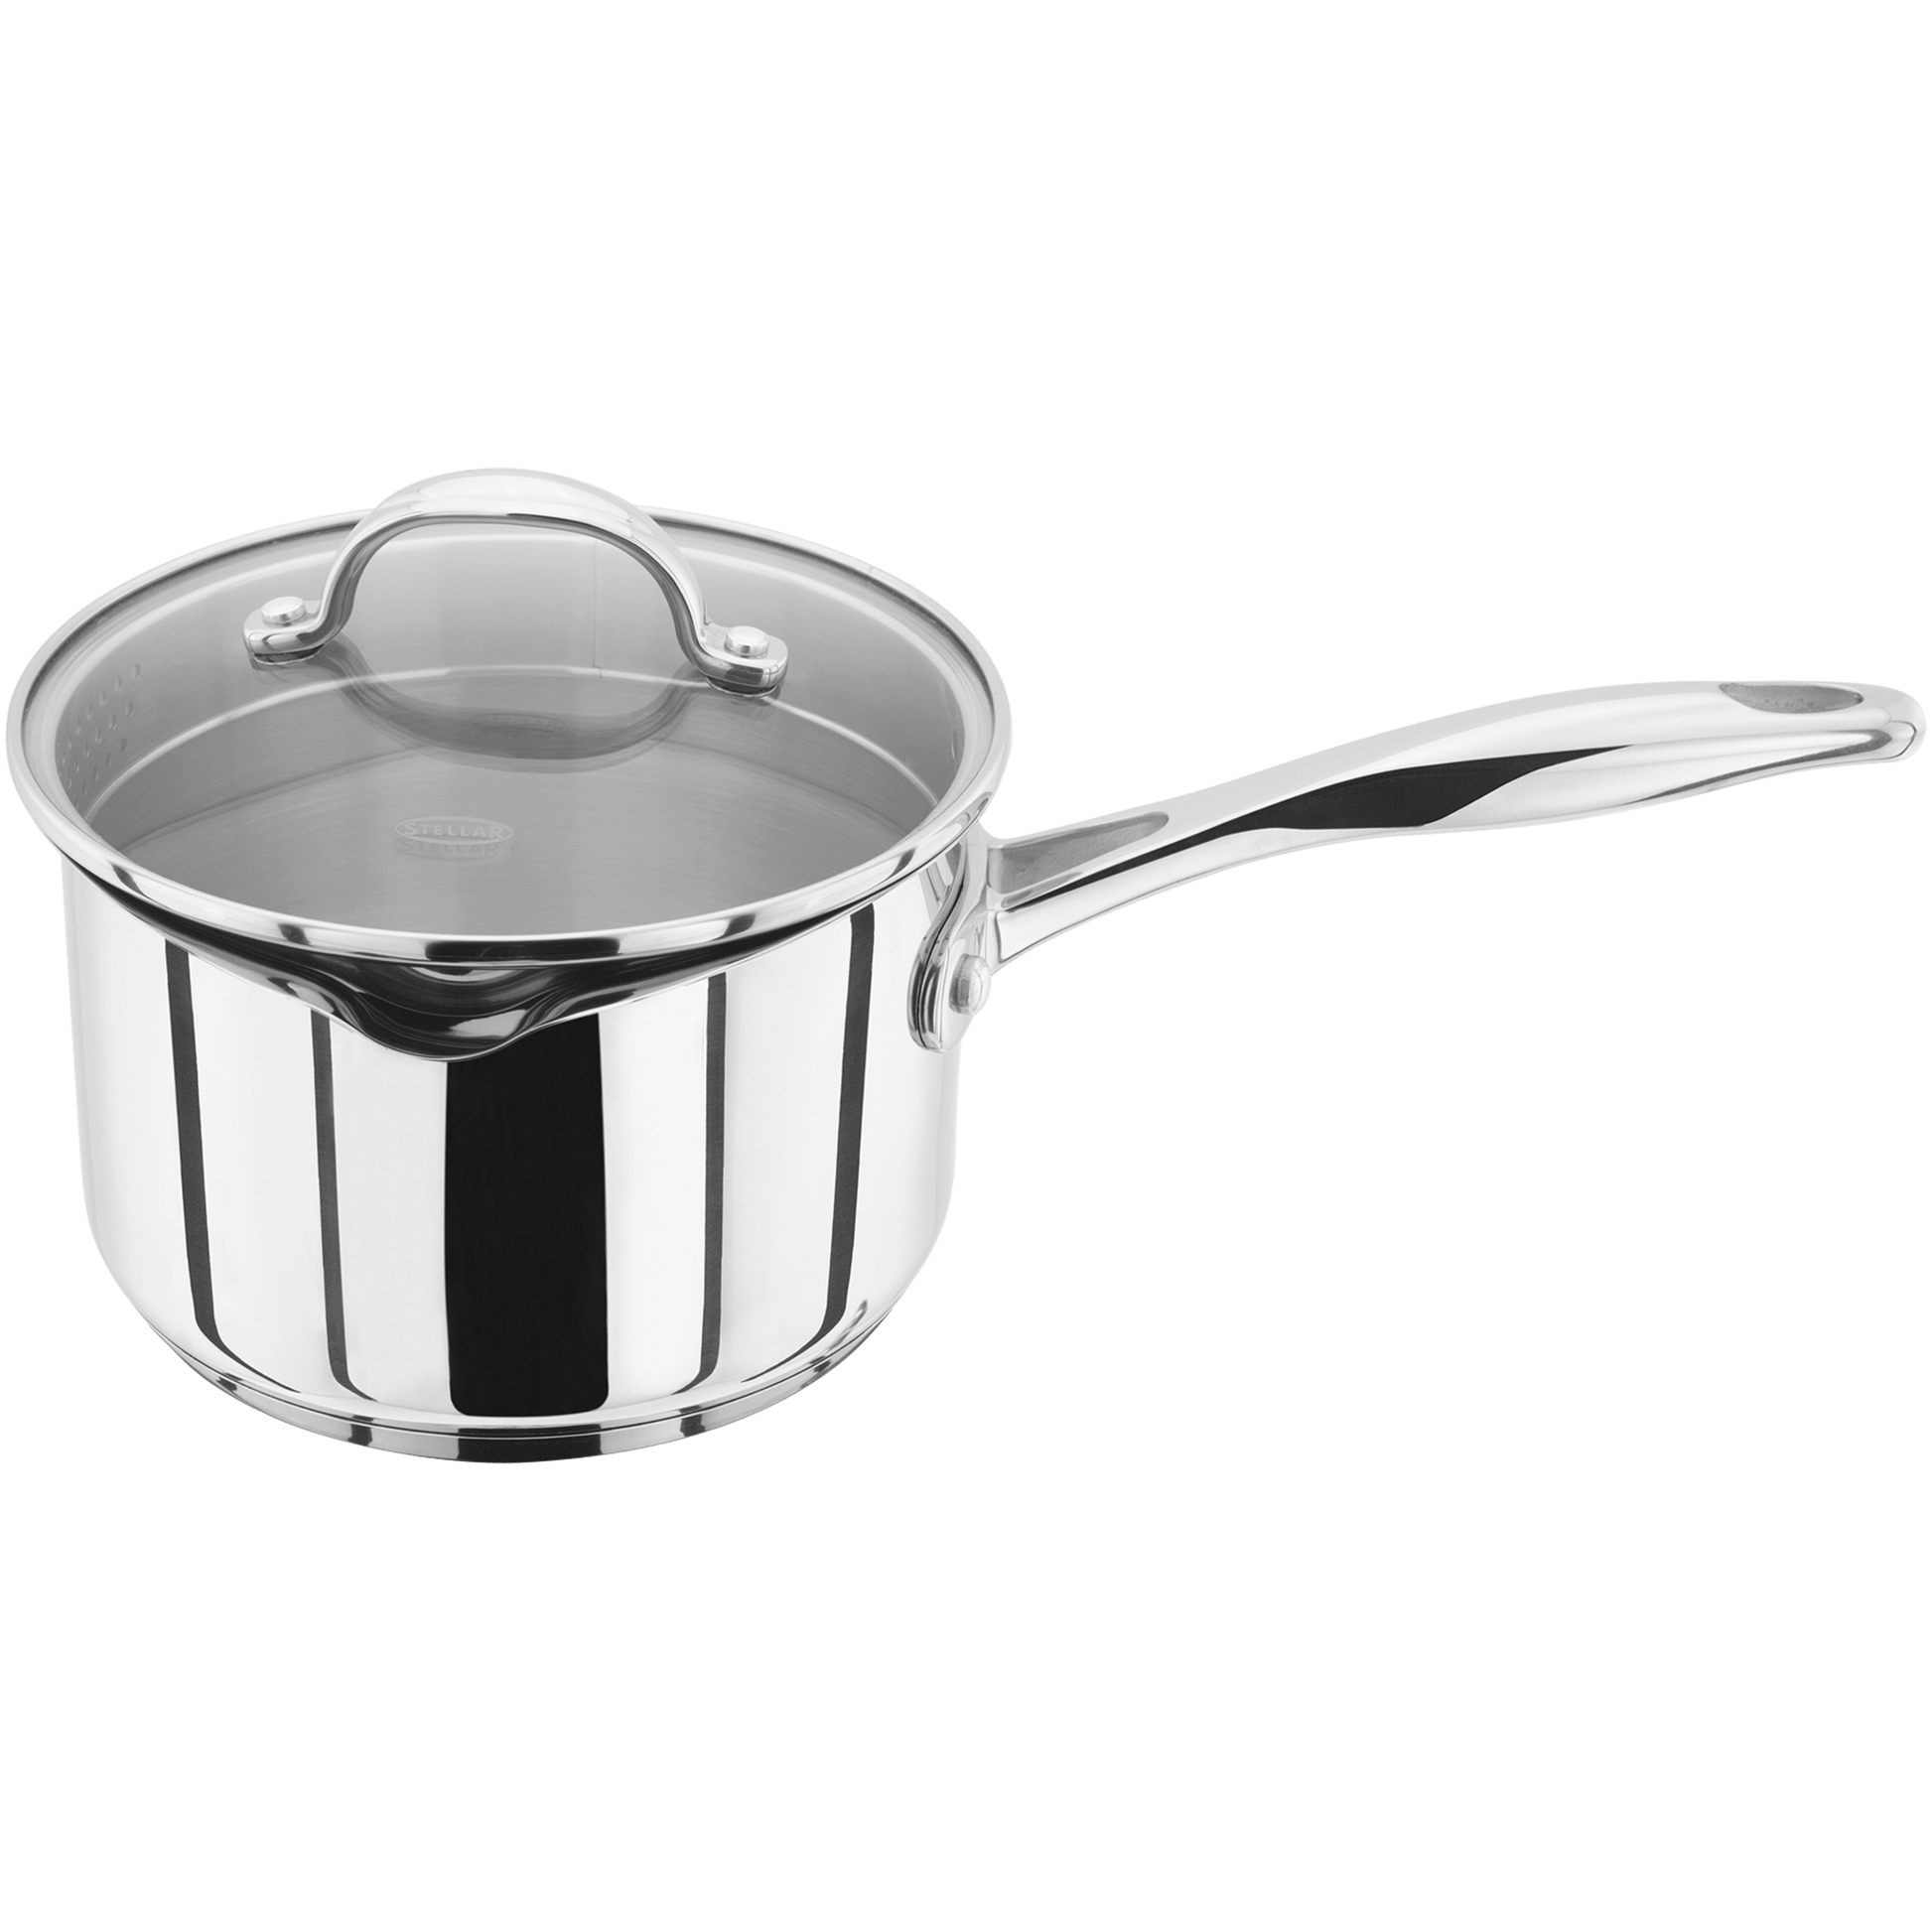 a stainless steel saucepan with a glass lid